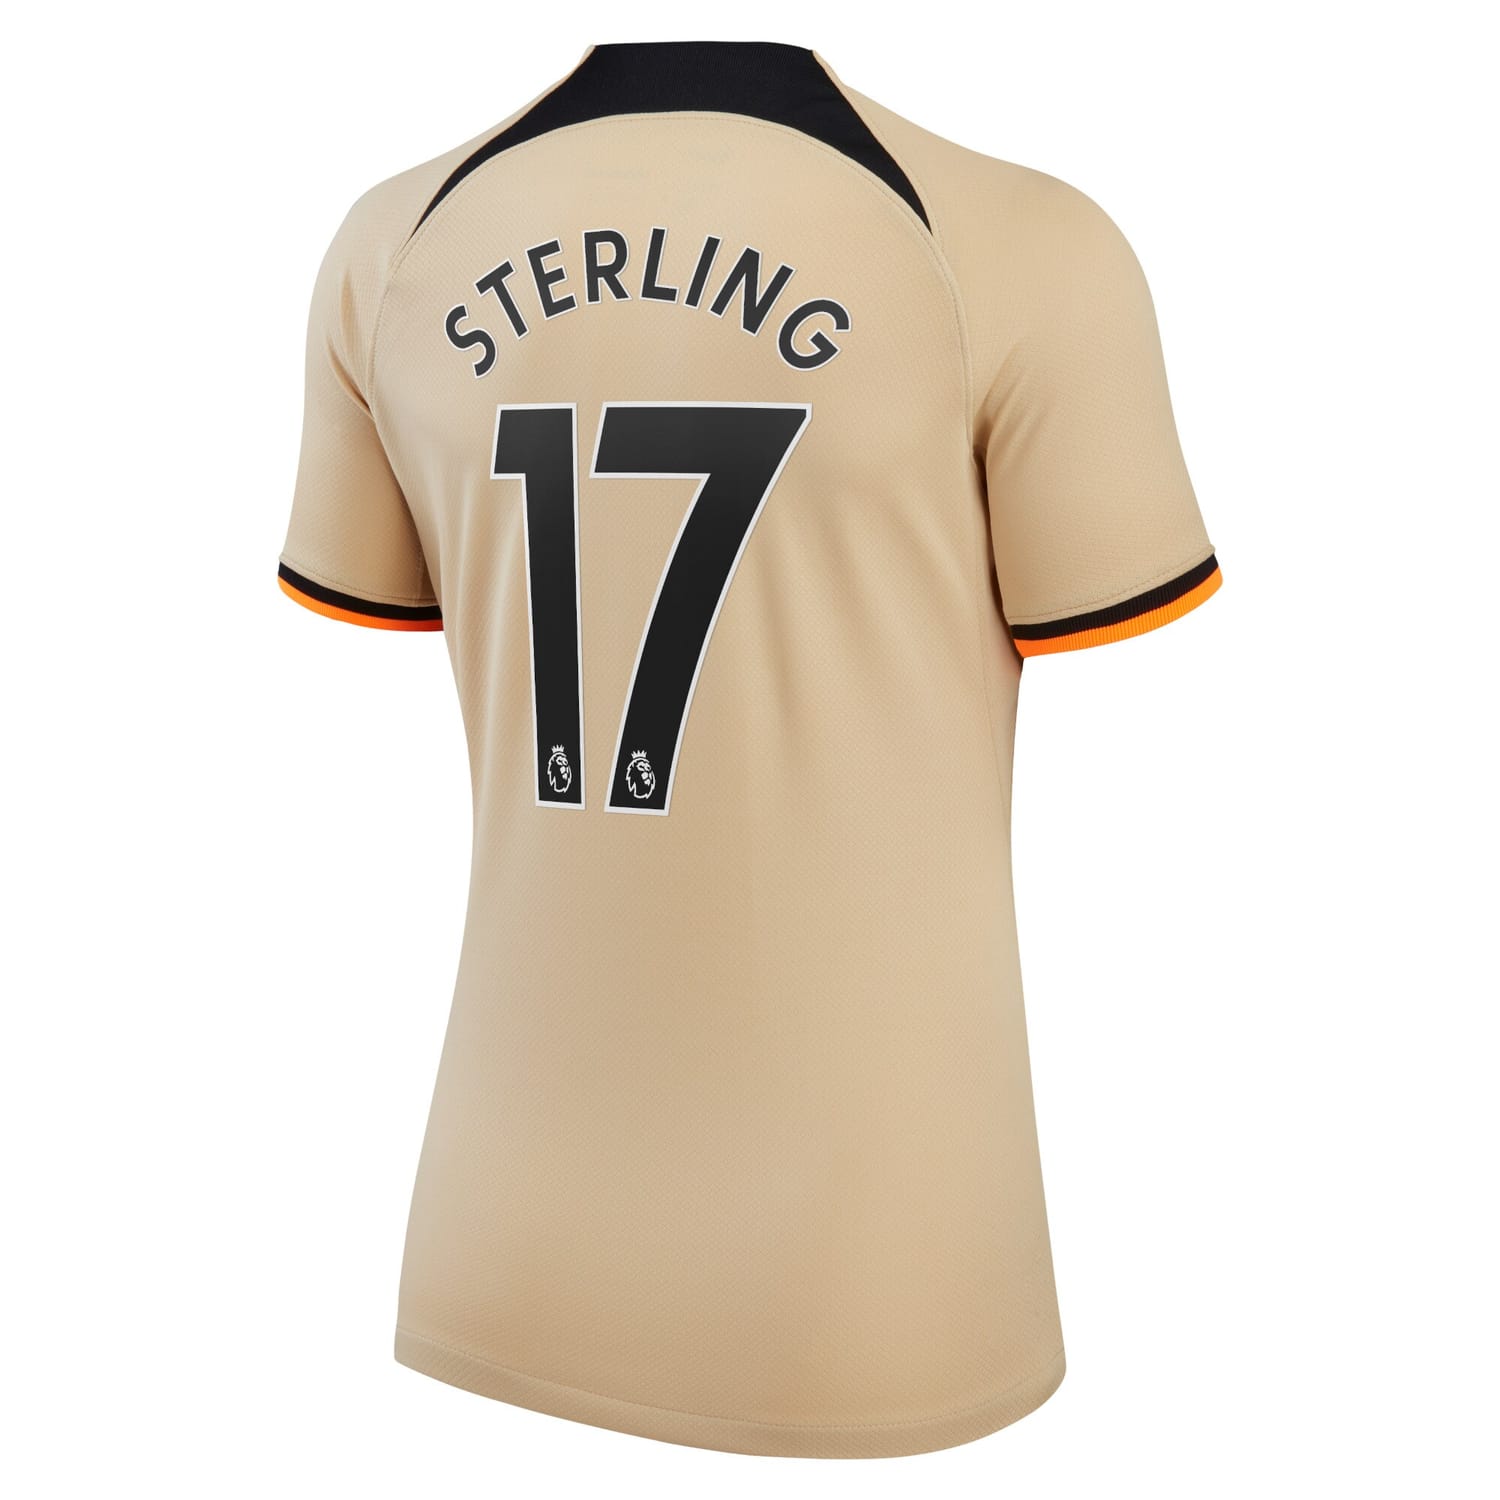 Premier League Chelsea Third Jersey Shirt Gold 2022-23 player Raheem Sterling printing for Women